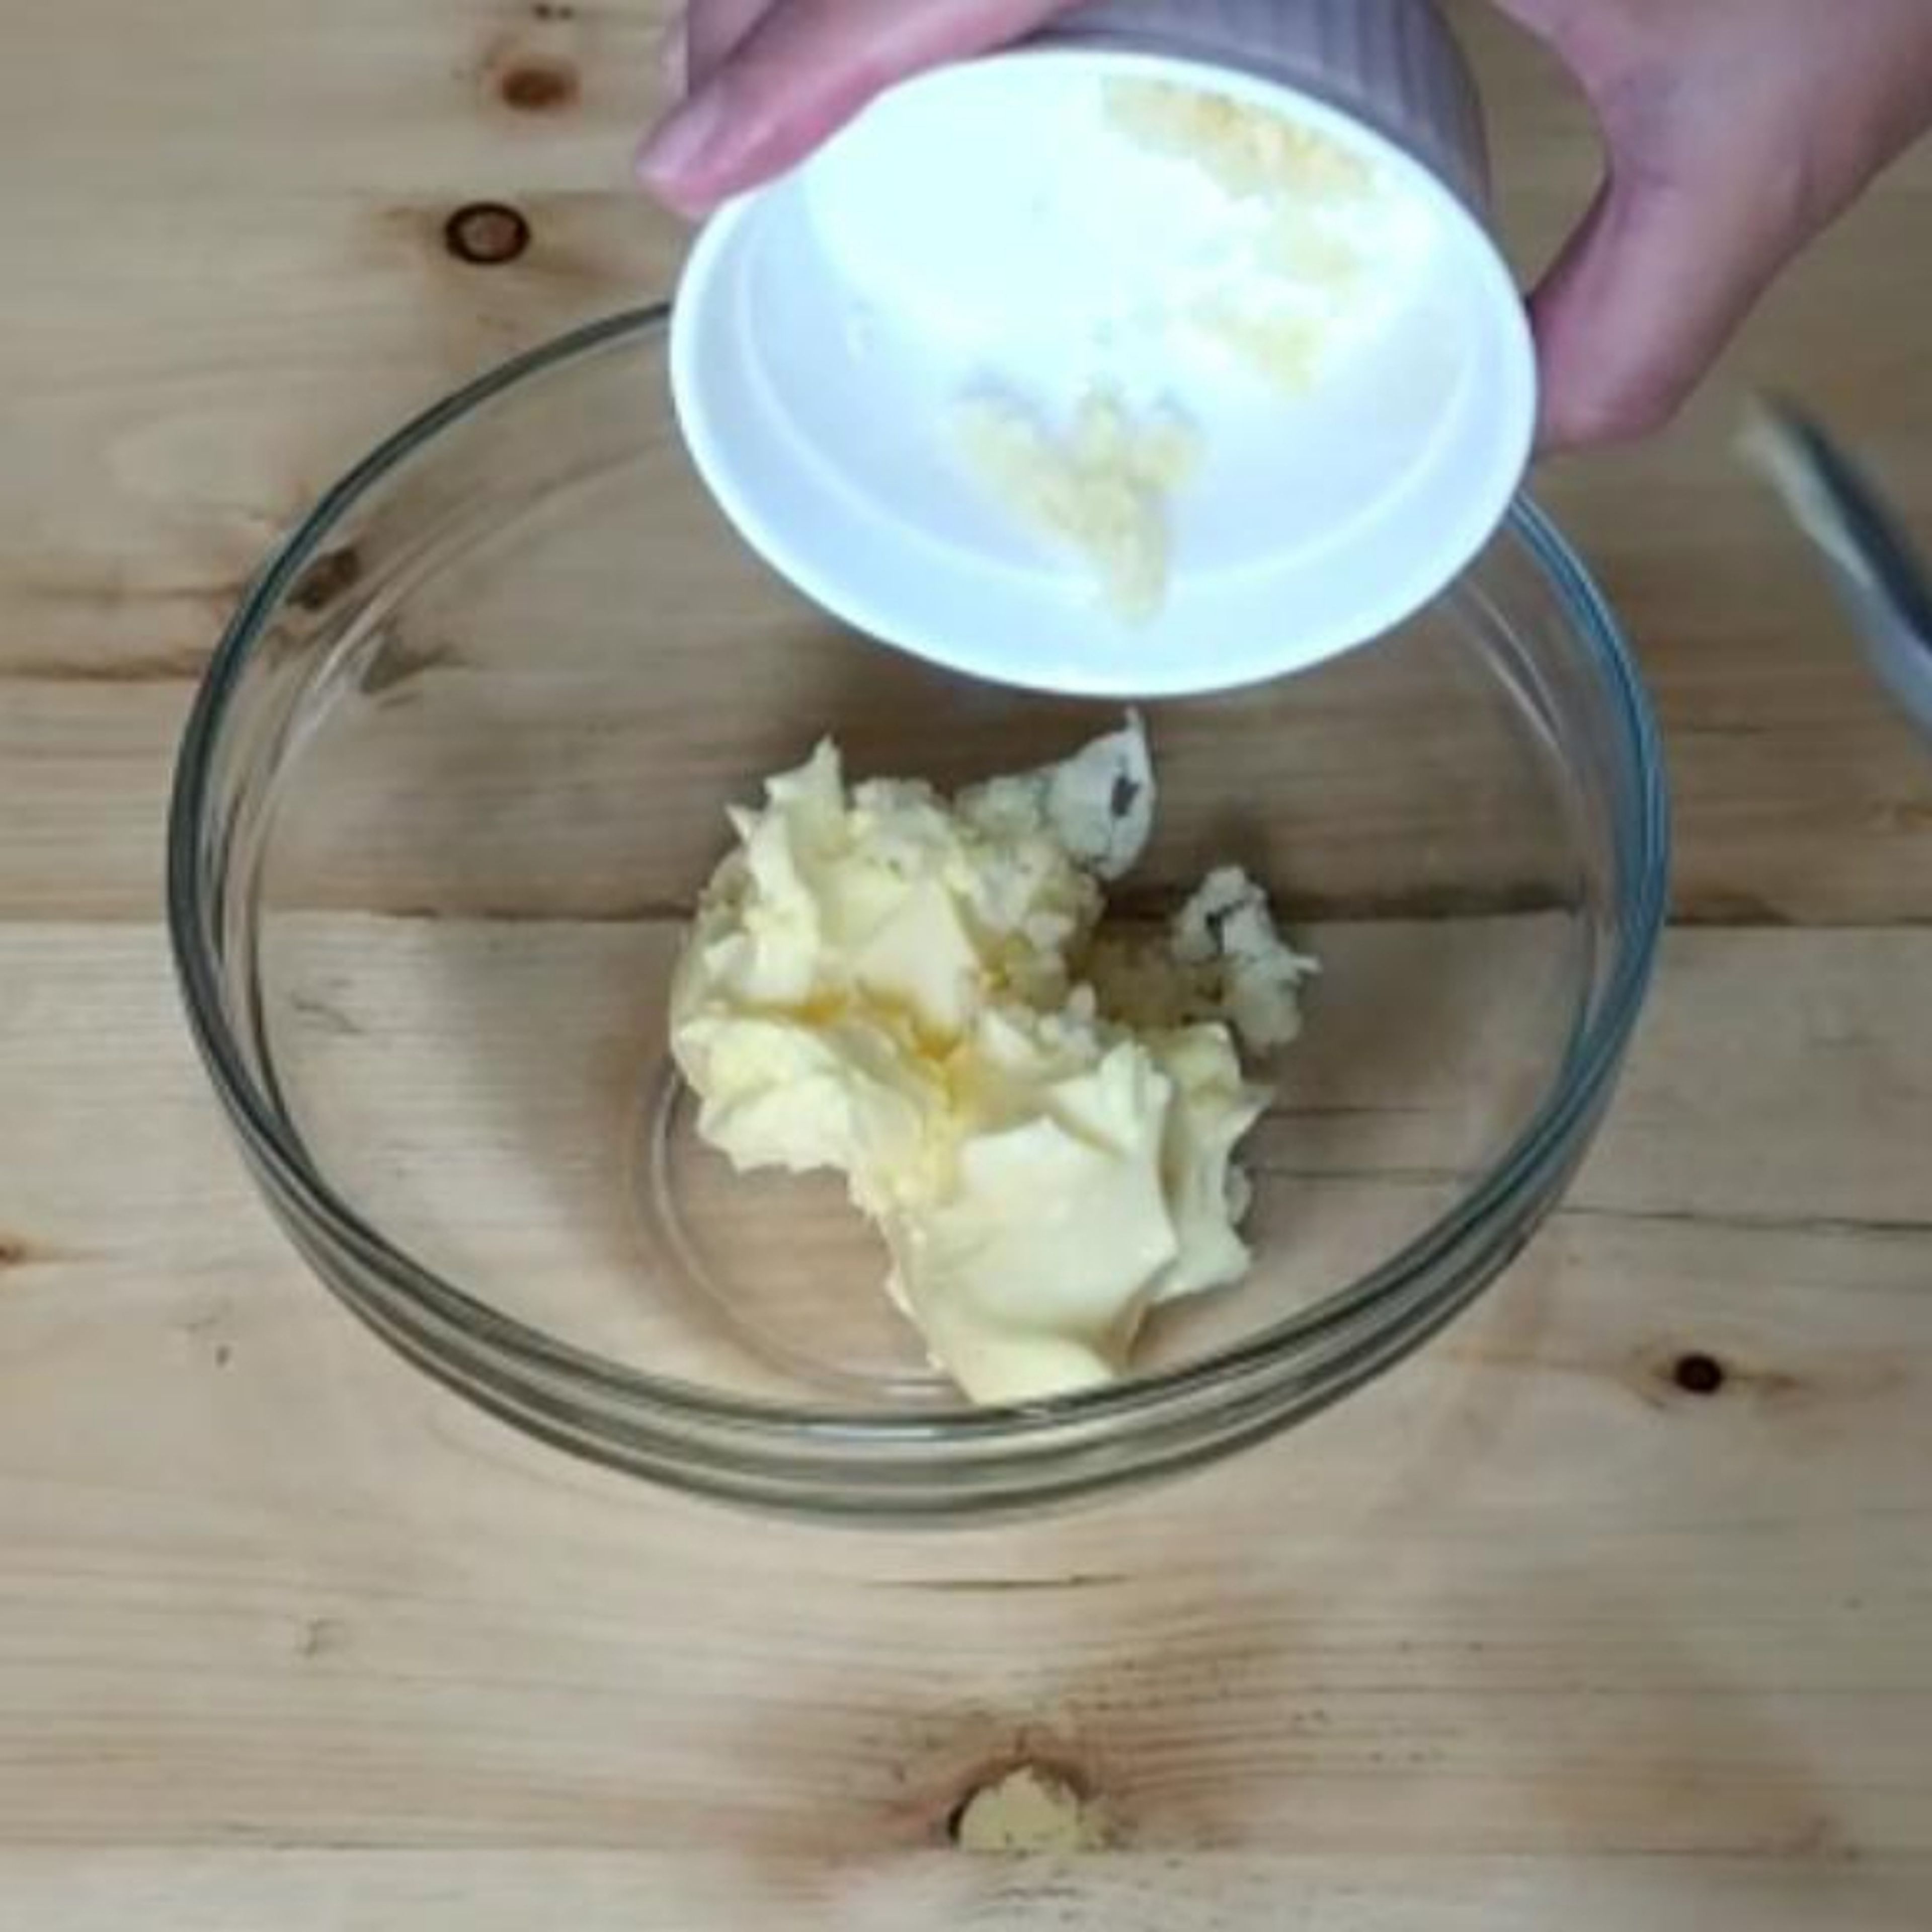 For making the Garlic butter paste : Mix together butter, oregano and minced garlic